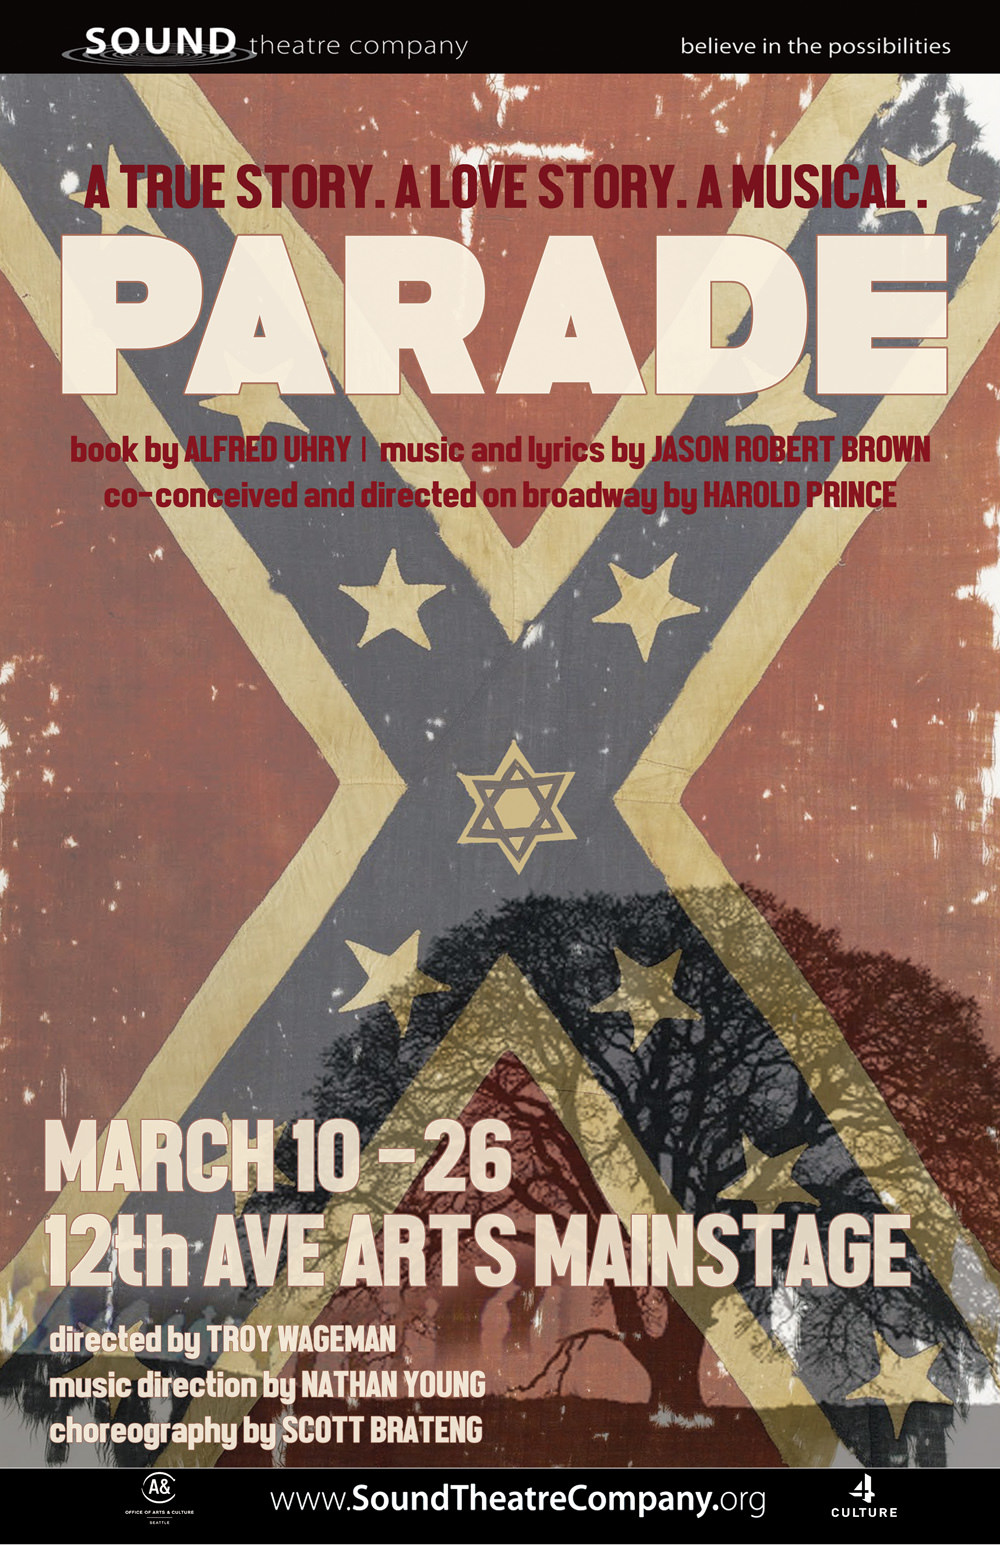 Poster for PARADE the musical,